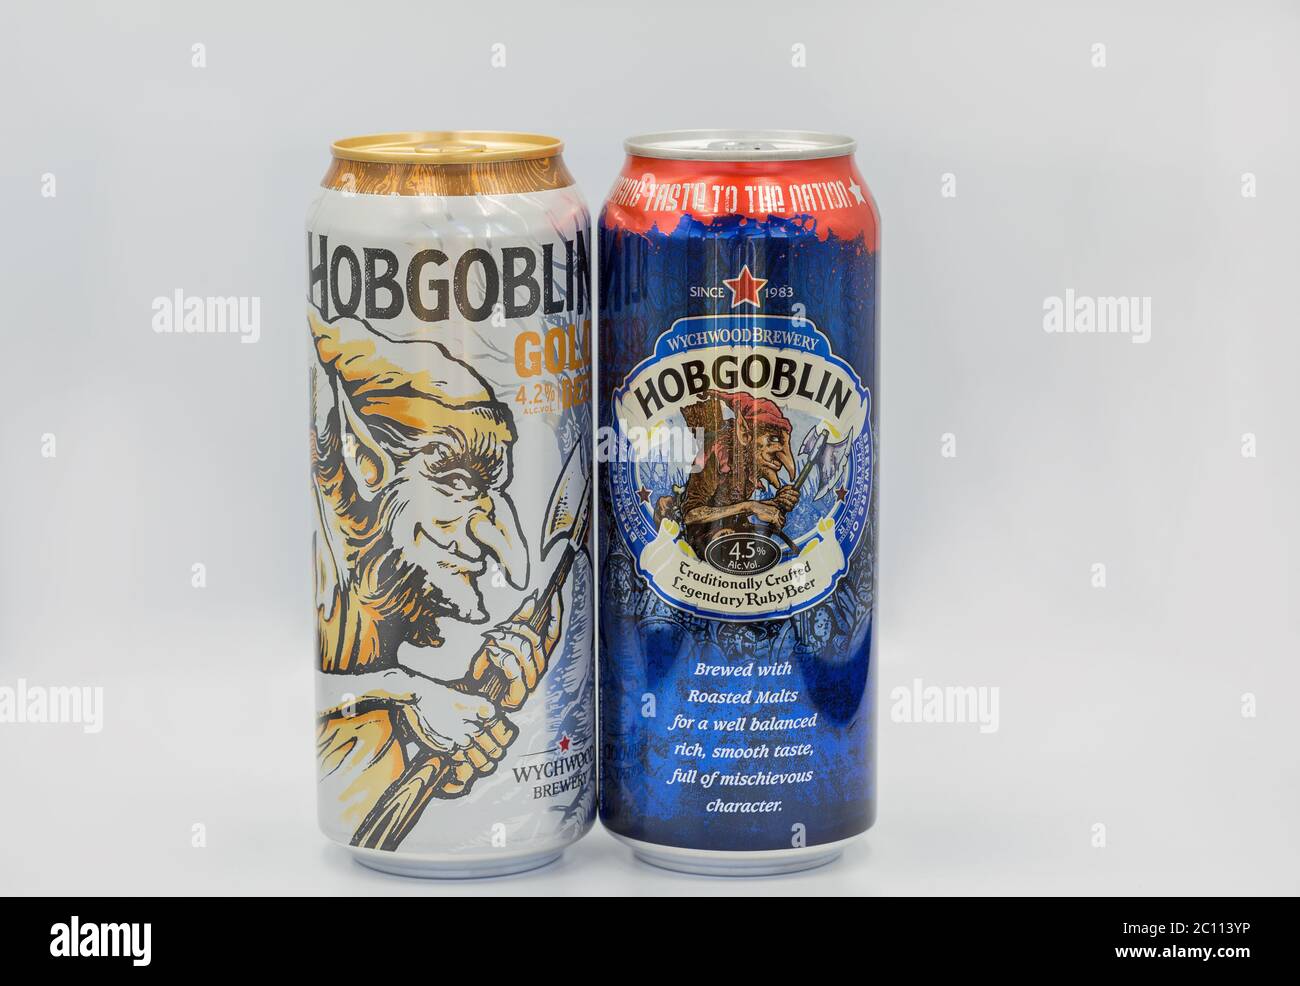 KYIV, UKRAINE - JUNE 06, 2020: Hobgoblin Gold and Ruby ale beer cans by Wychwood Brewery closeup against white. Brewery in Witney, Oxfordshire, Englan Stock Photo